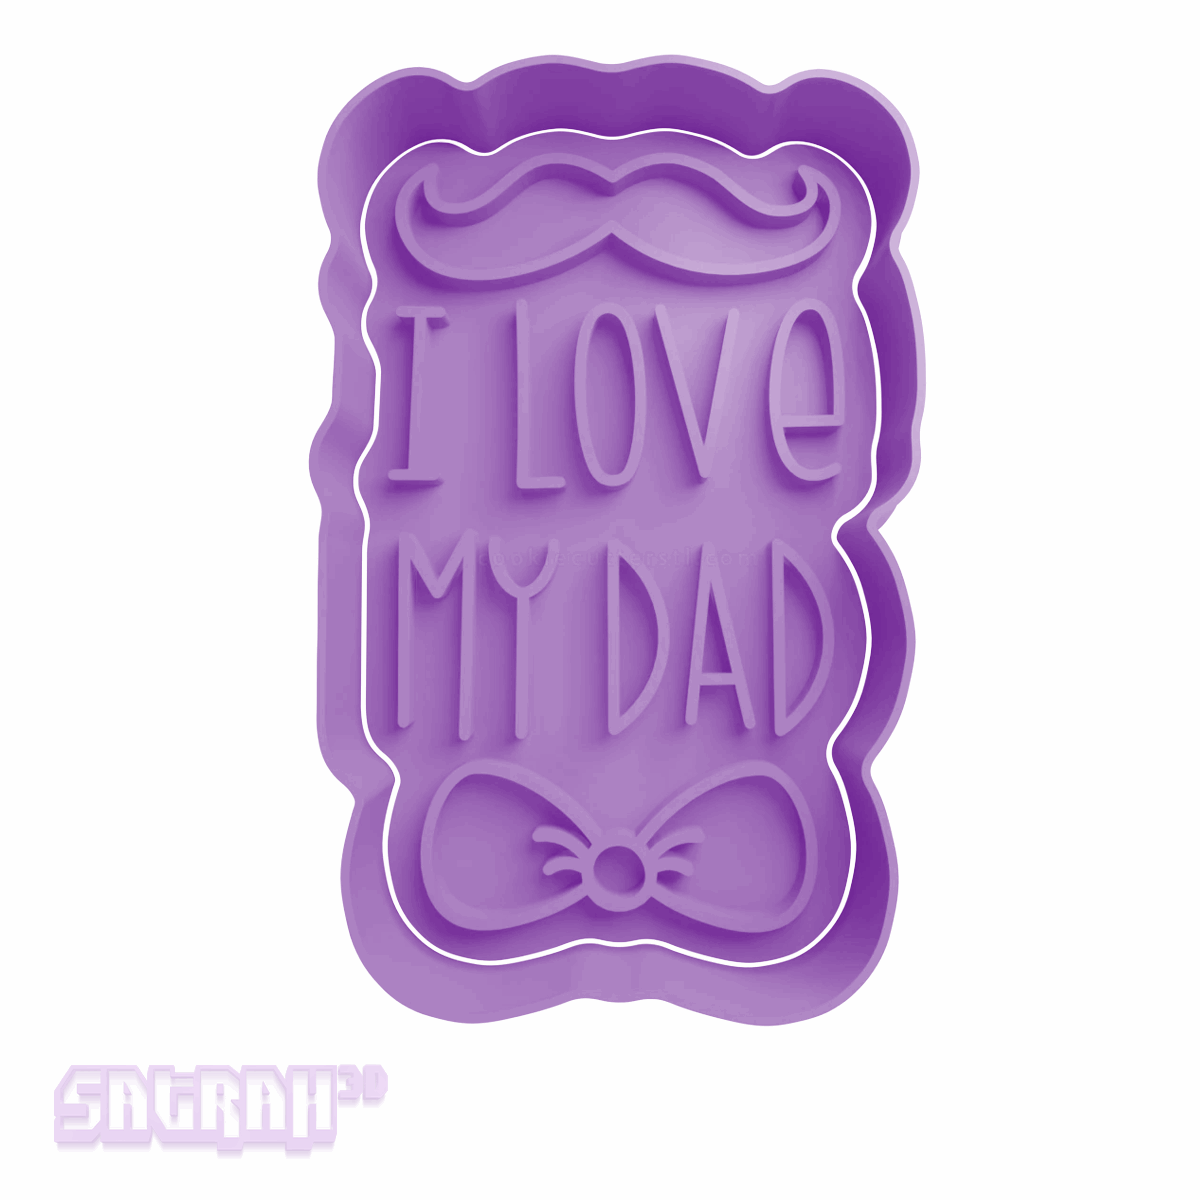 I Love My Dad with Bow Tie & Moustache Cookie Cutter | Satrah 3D